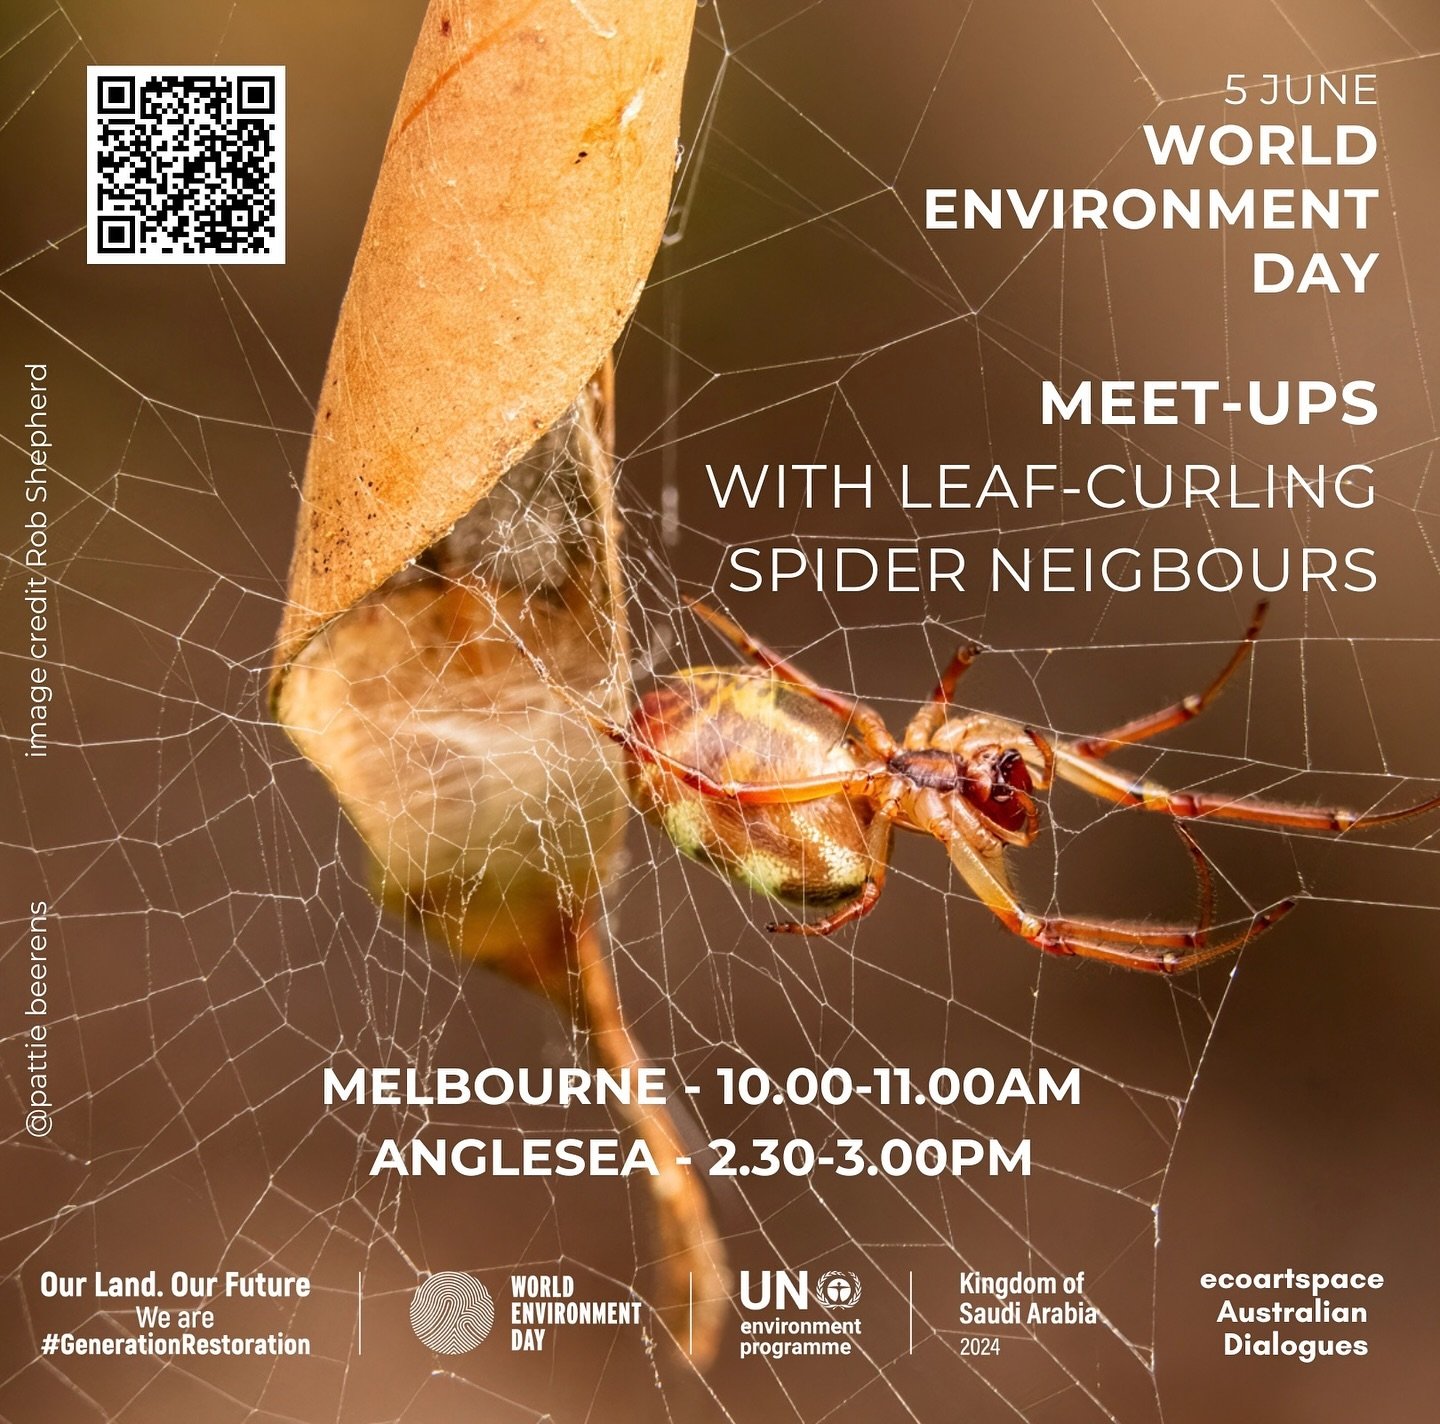 🕷️ I am excited to be hosting two events for World Environment Day 2024 
🕷️ on Wednesday, 5 June 2024 
🕷️ in the morning at the Botanic Gardens in Melbourne
🕷️ in the afternoon in Anglesea 
🕷️ to meet our leaf curling spider neighbours and my ar